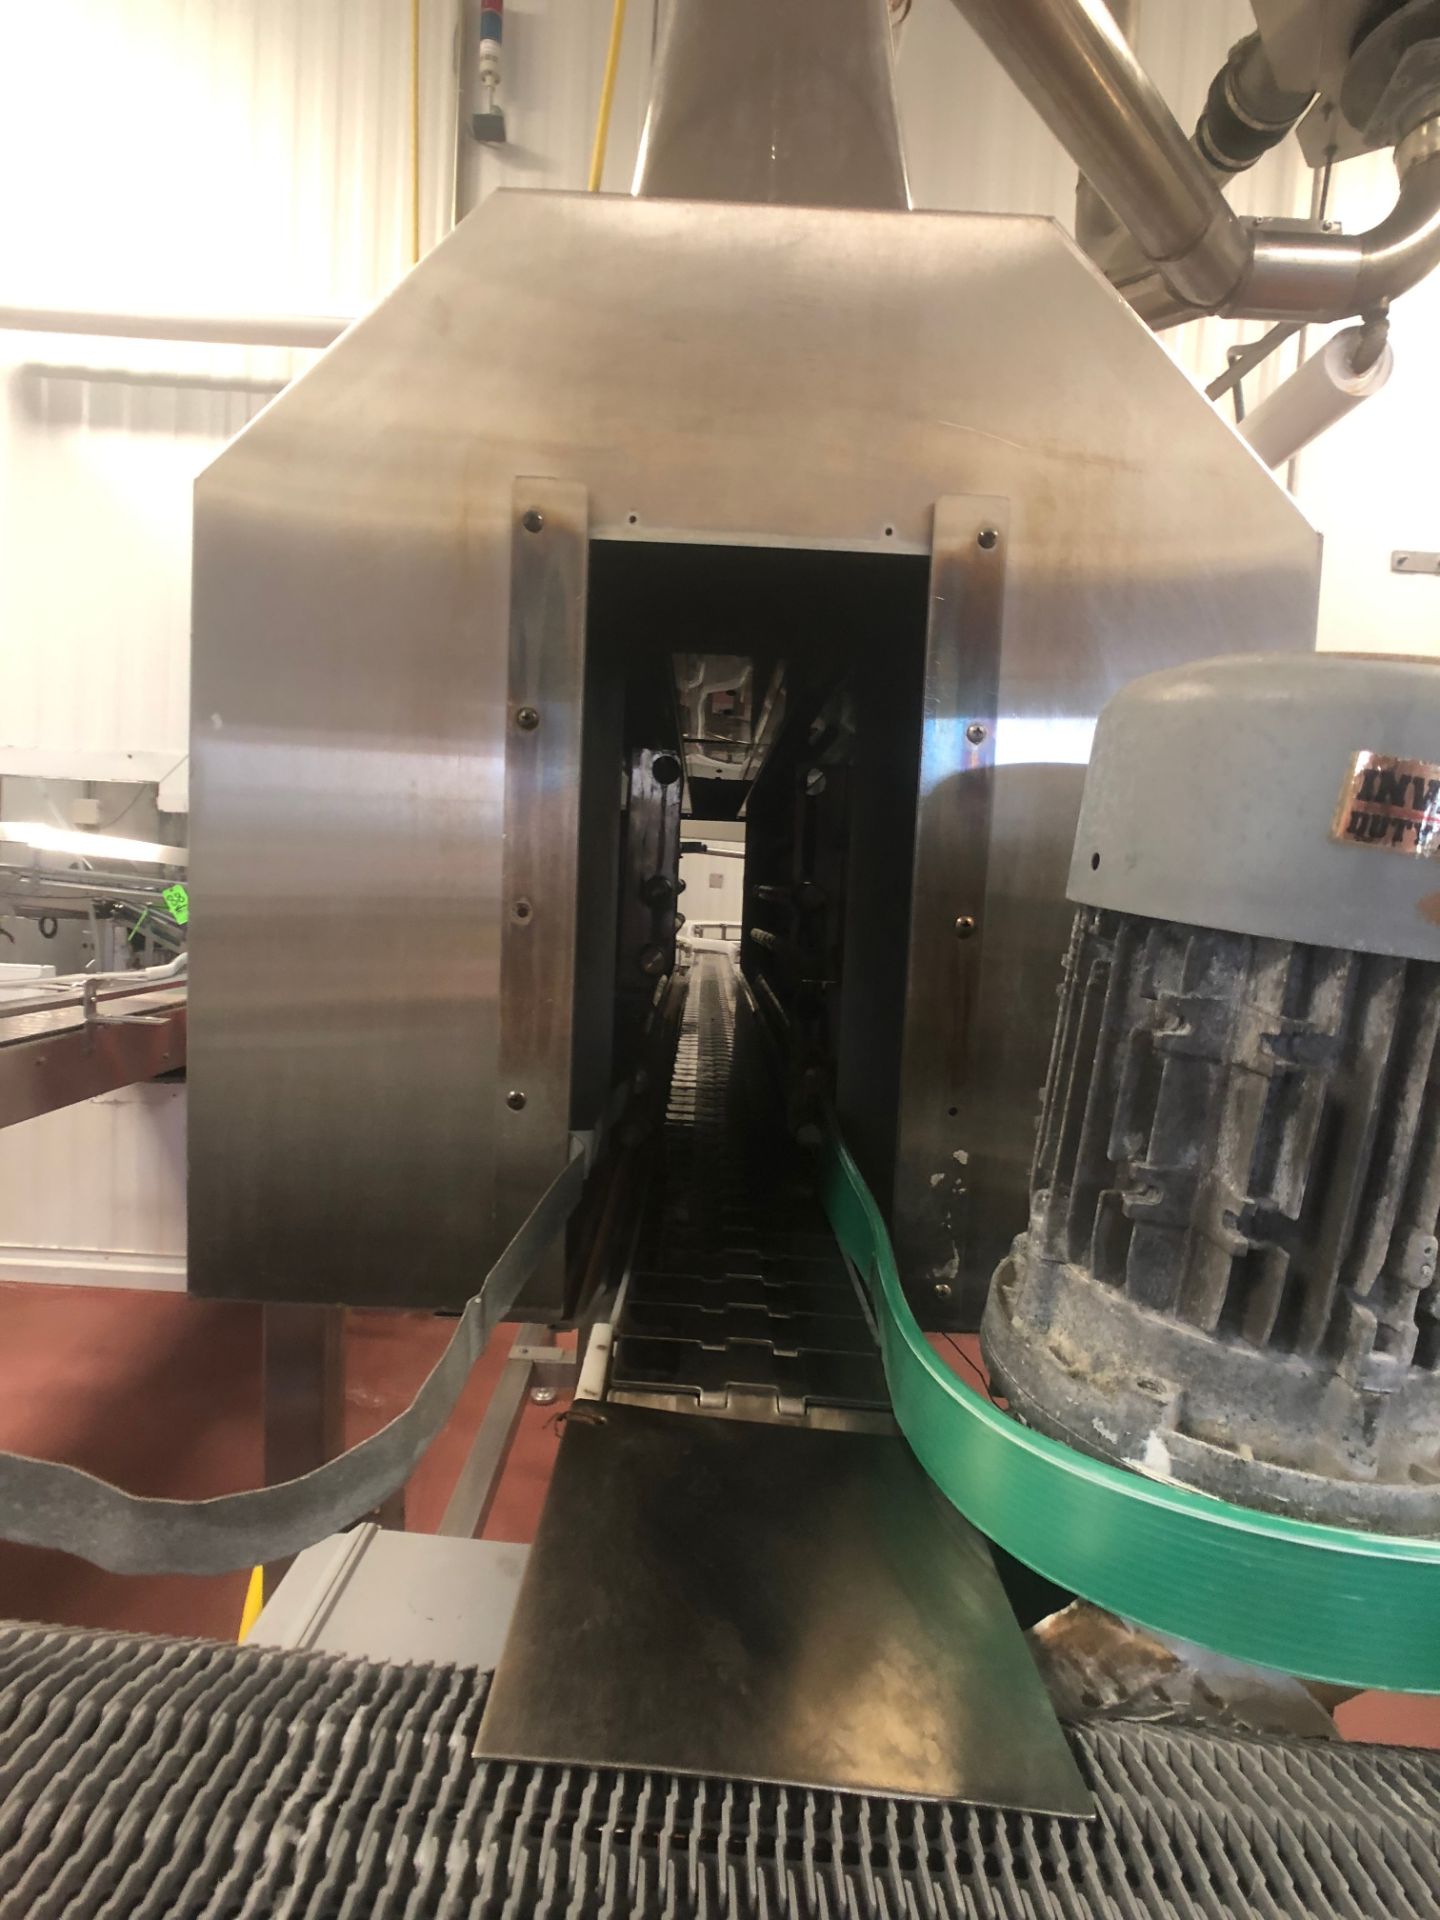 Precision Stainless Machinery Co Steam Shrink Tunnel, Model NSTS-2000, S/N 1112904-5036663 - Image 2 of 5